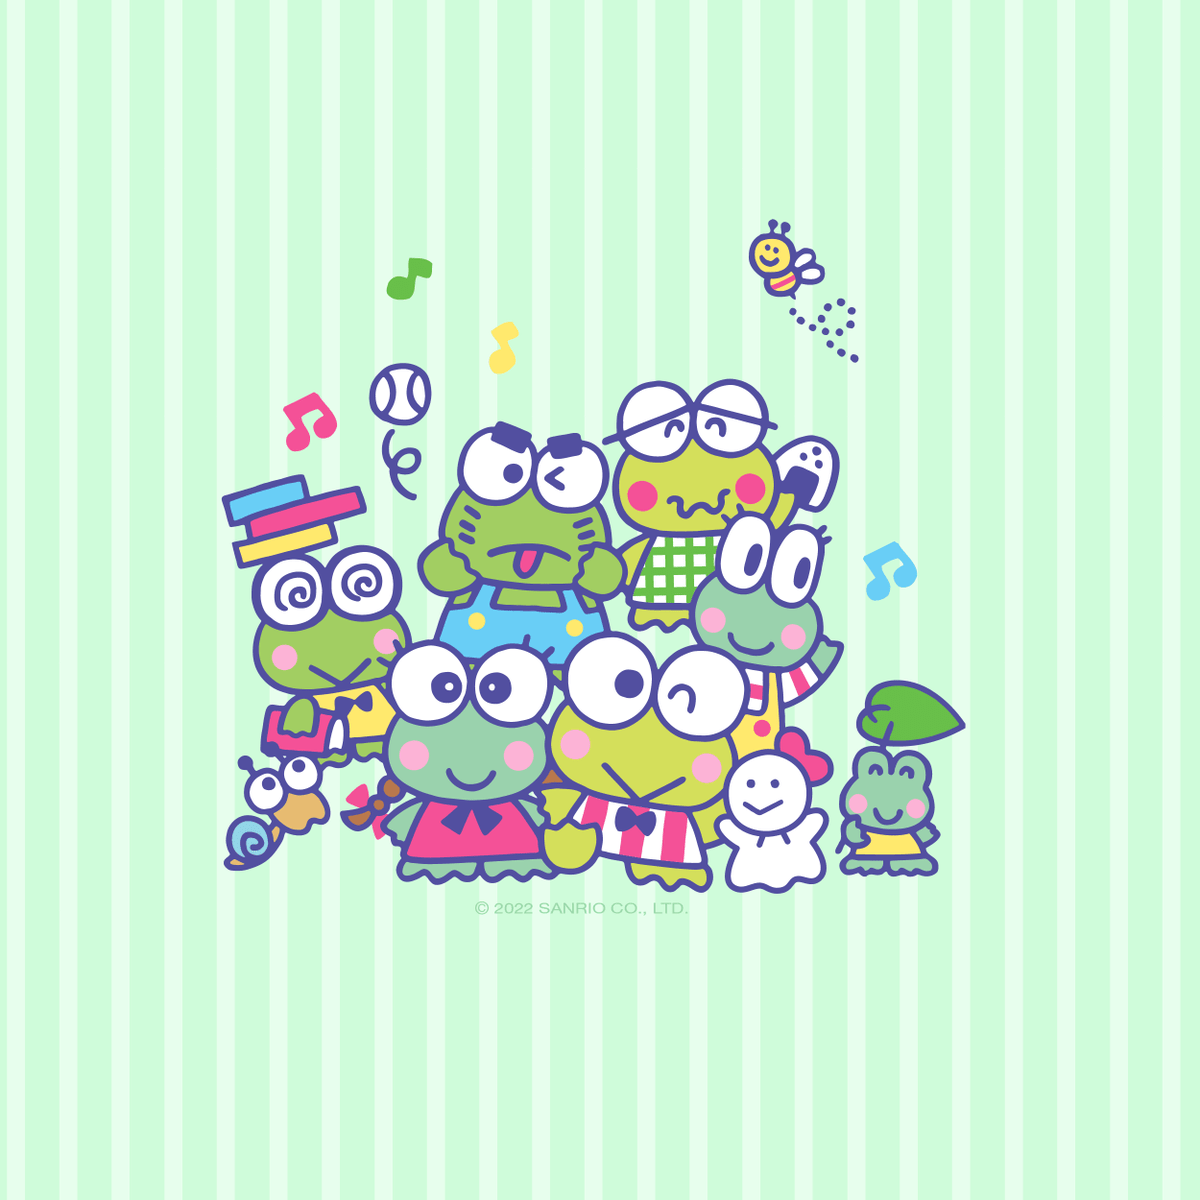 Take #Keroppi on the go with new background for your phone!